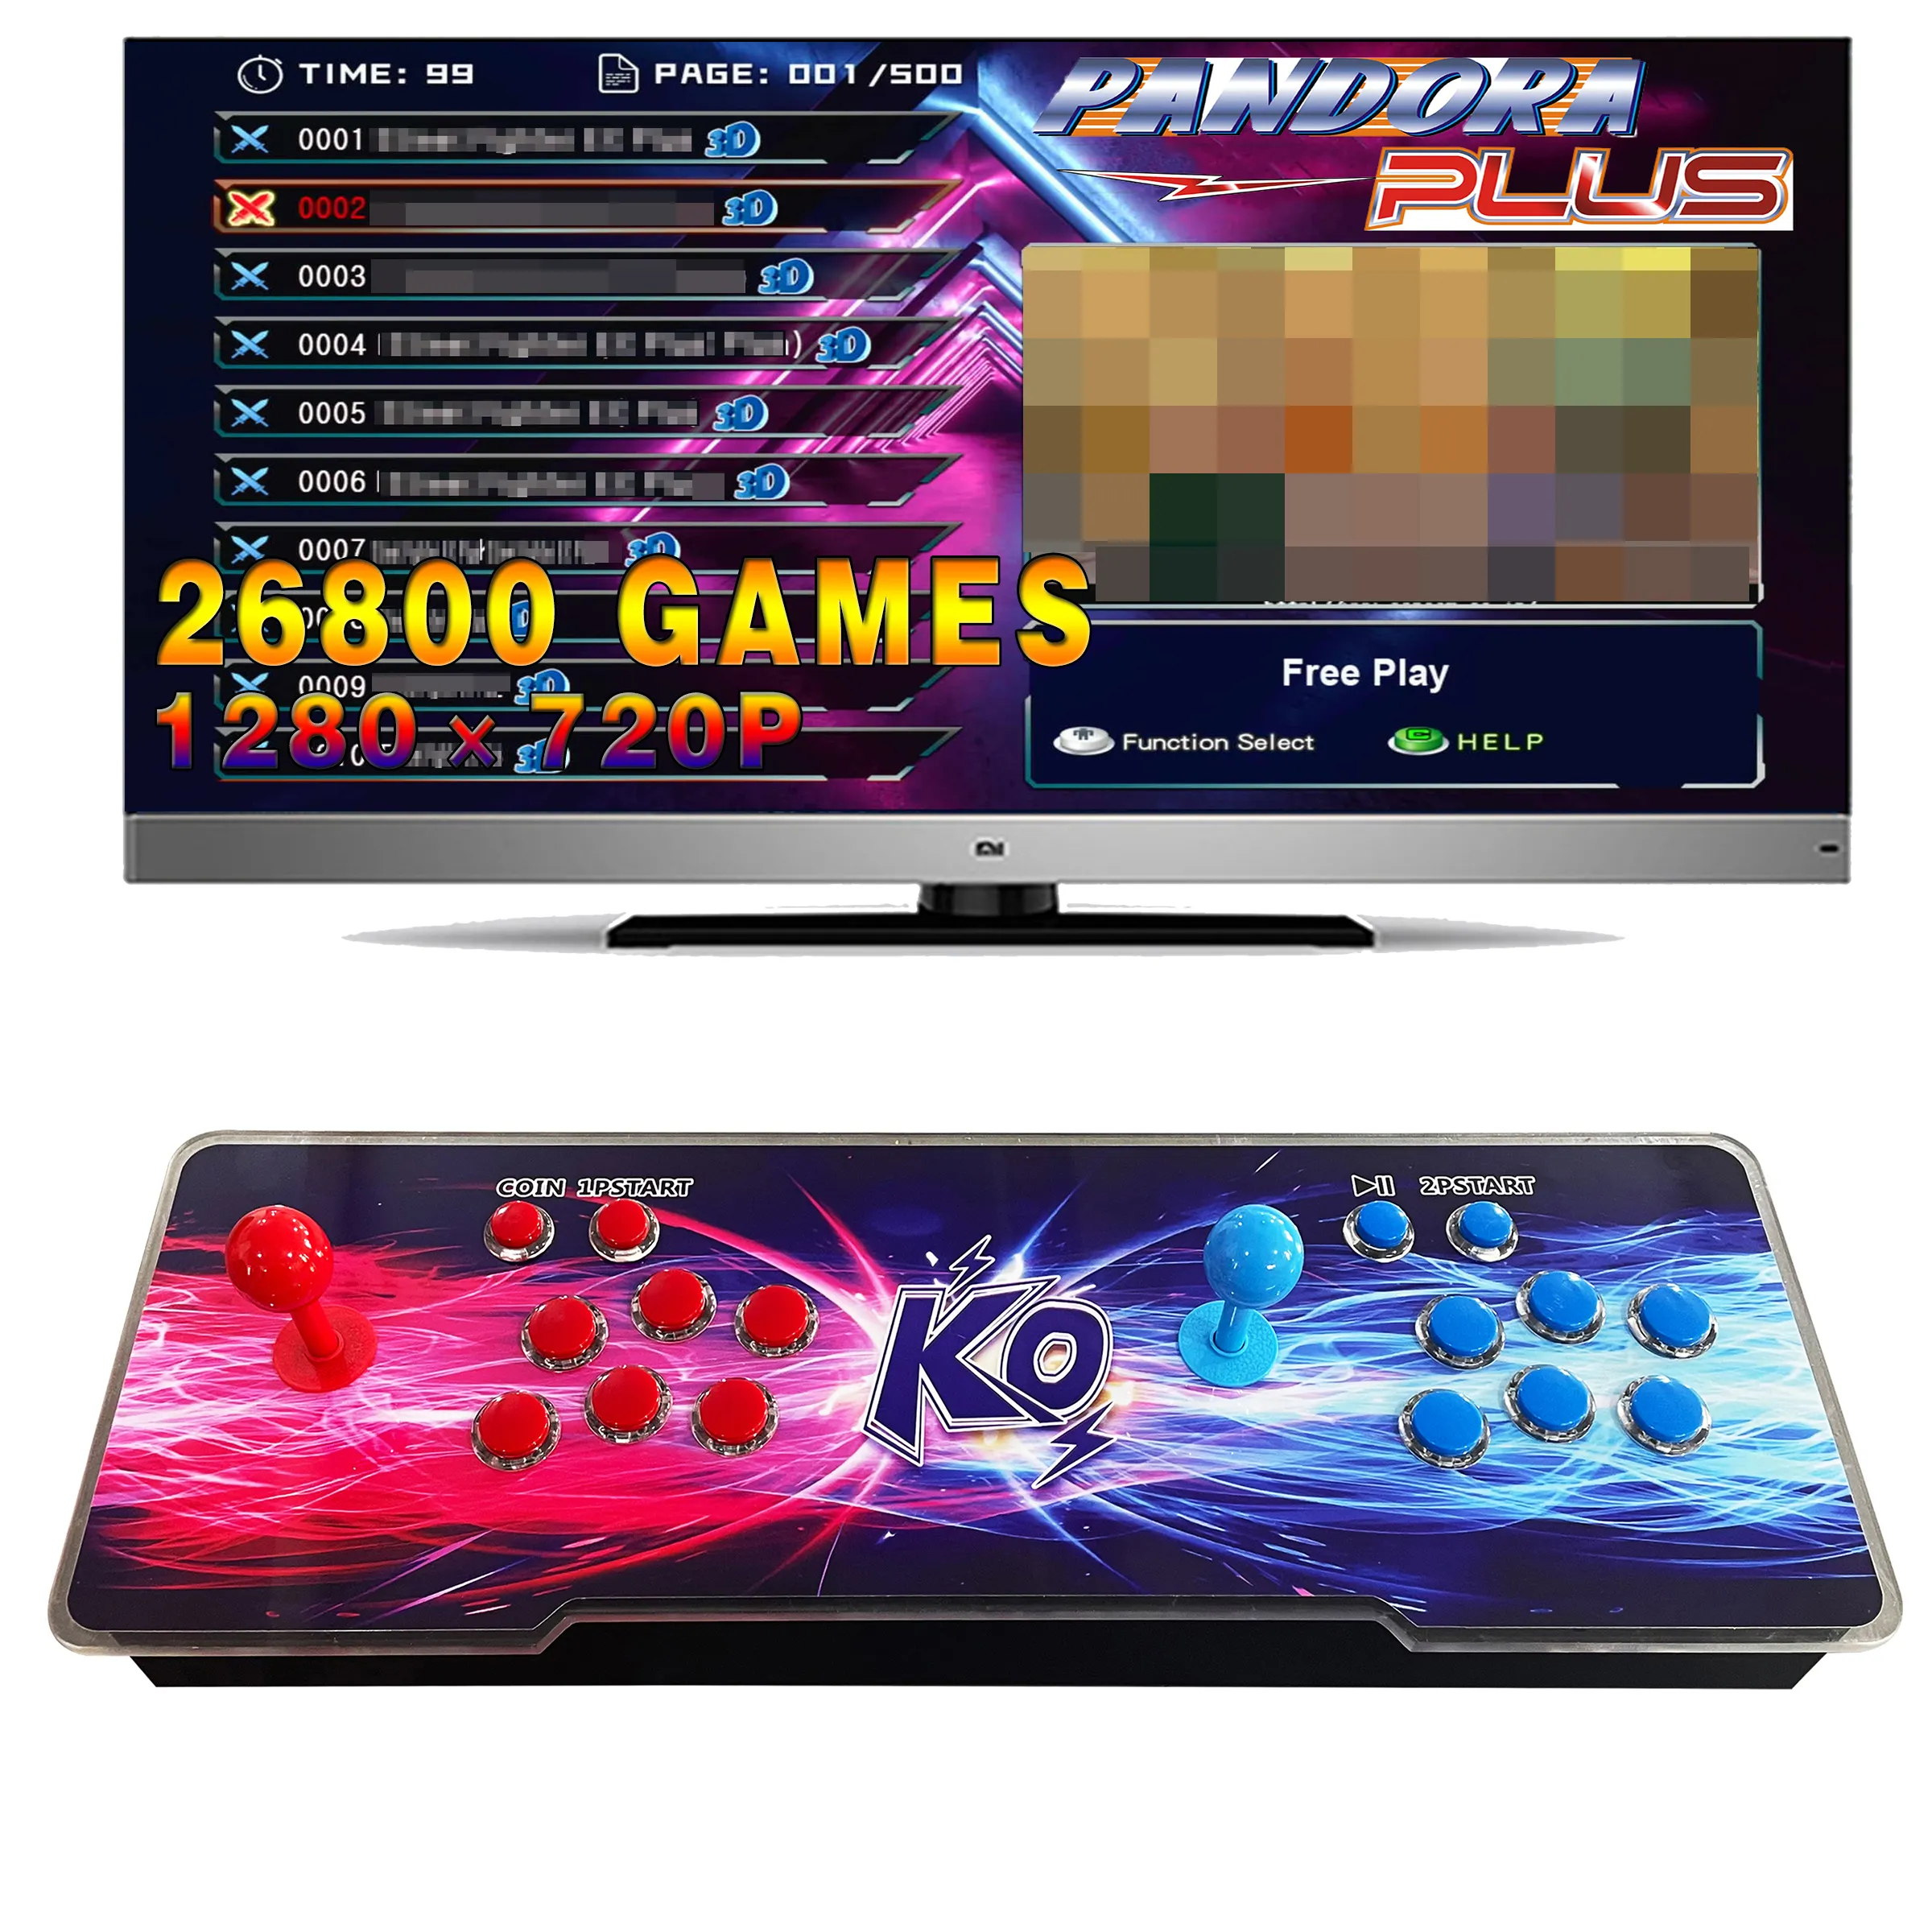 Arcade 20000 Classic Game 4 Player Game Handle Box Hd Arcade game Street Fighter Box Arcade Console